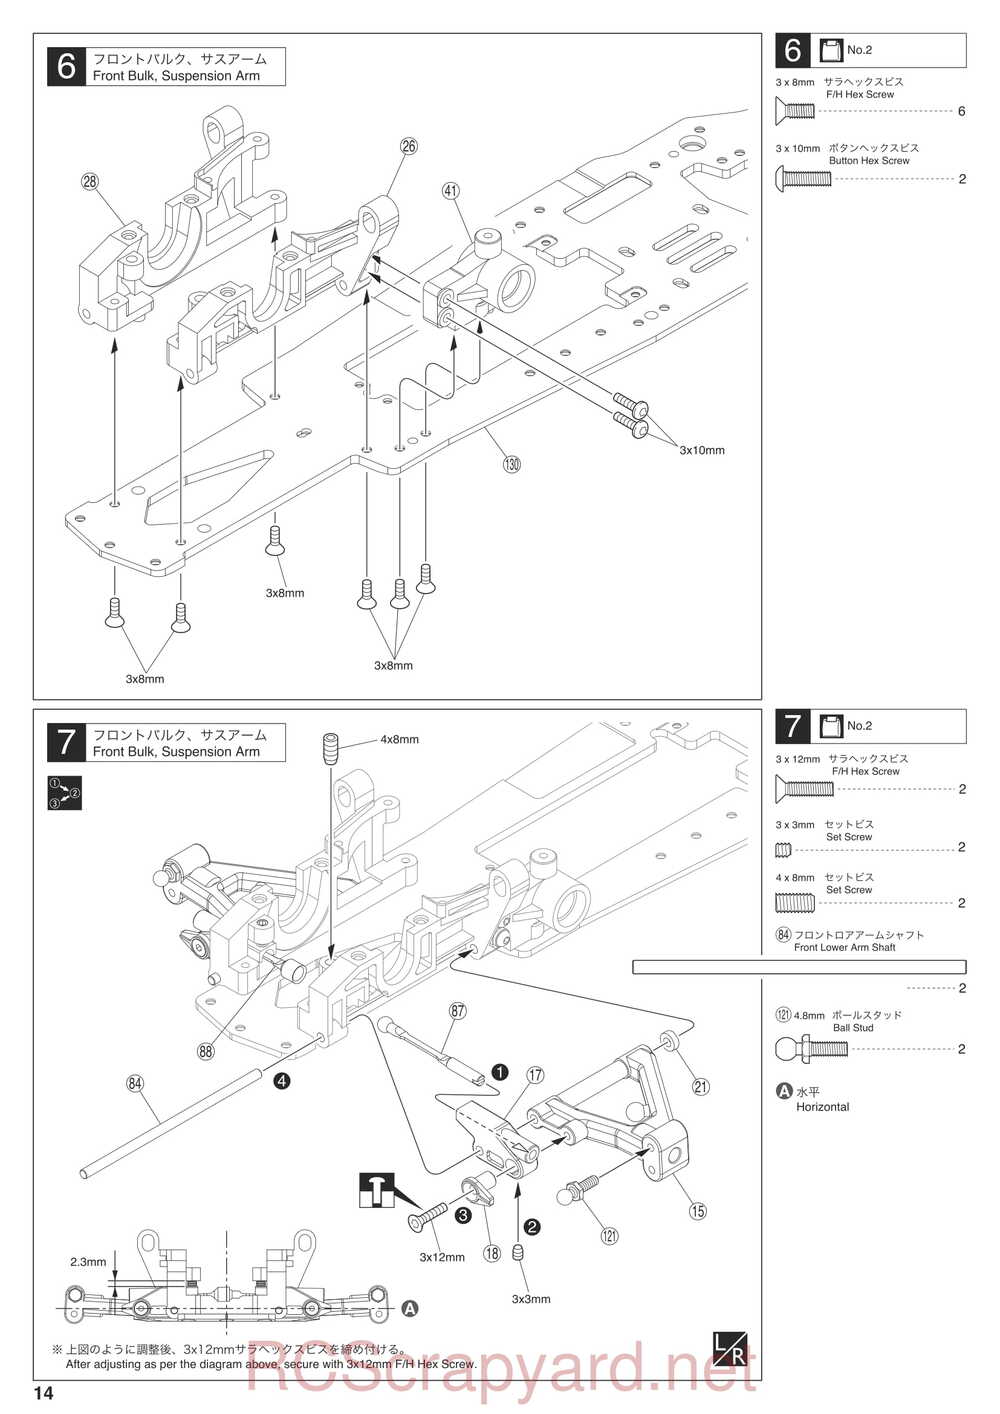 Kyosho - 31265 - V-ONE-R4 - Manual - Page 14